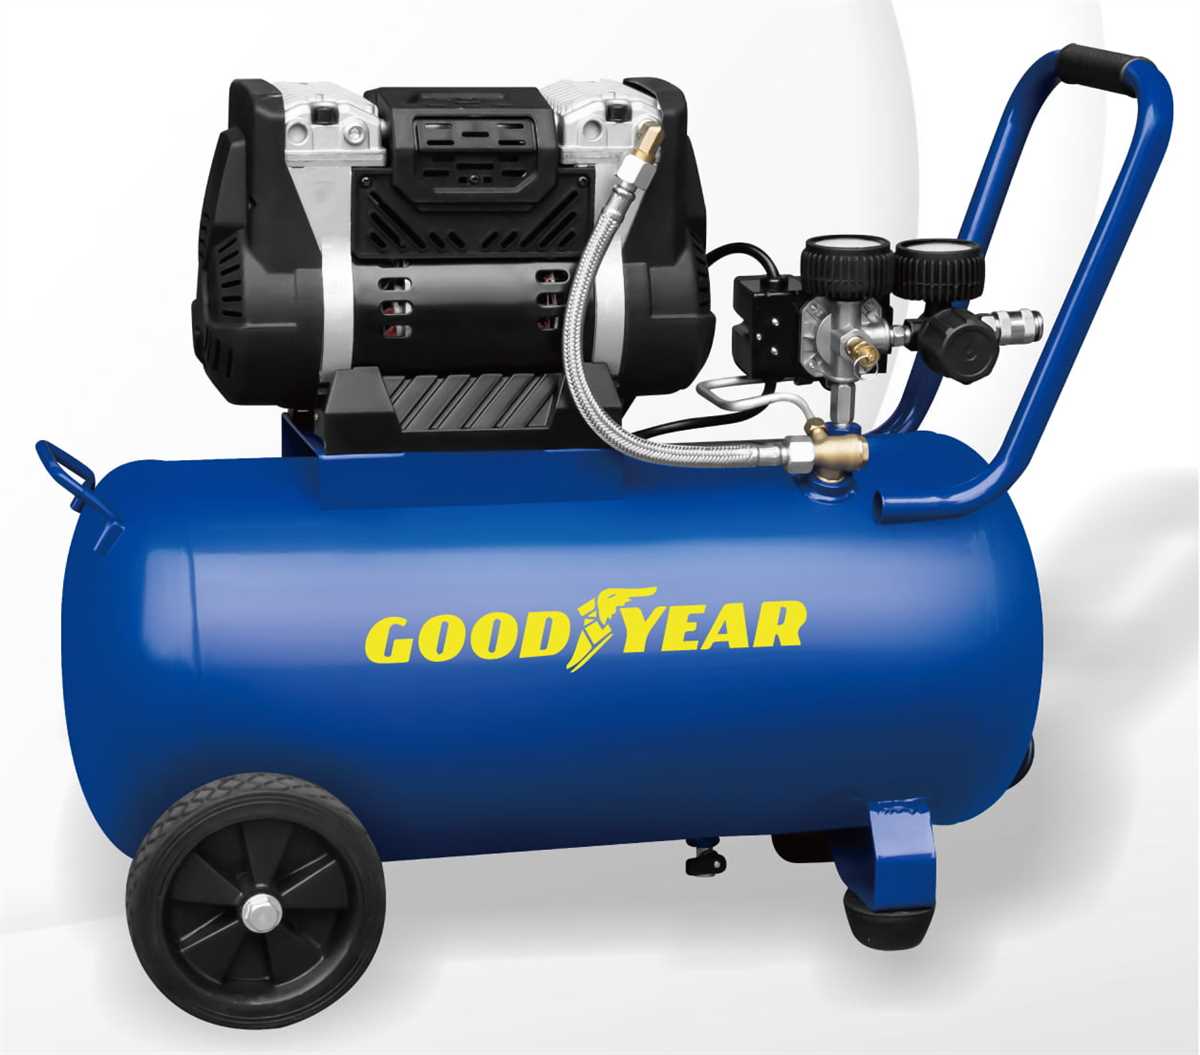 Considerations for Portable Air Compressors